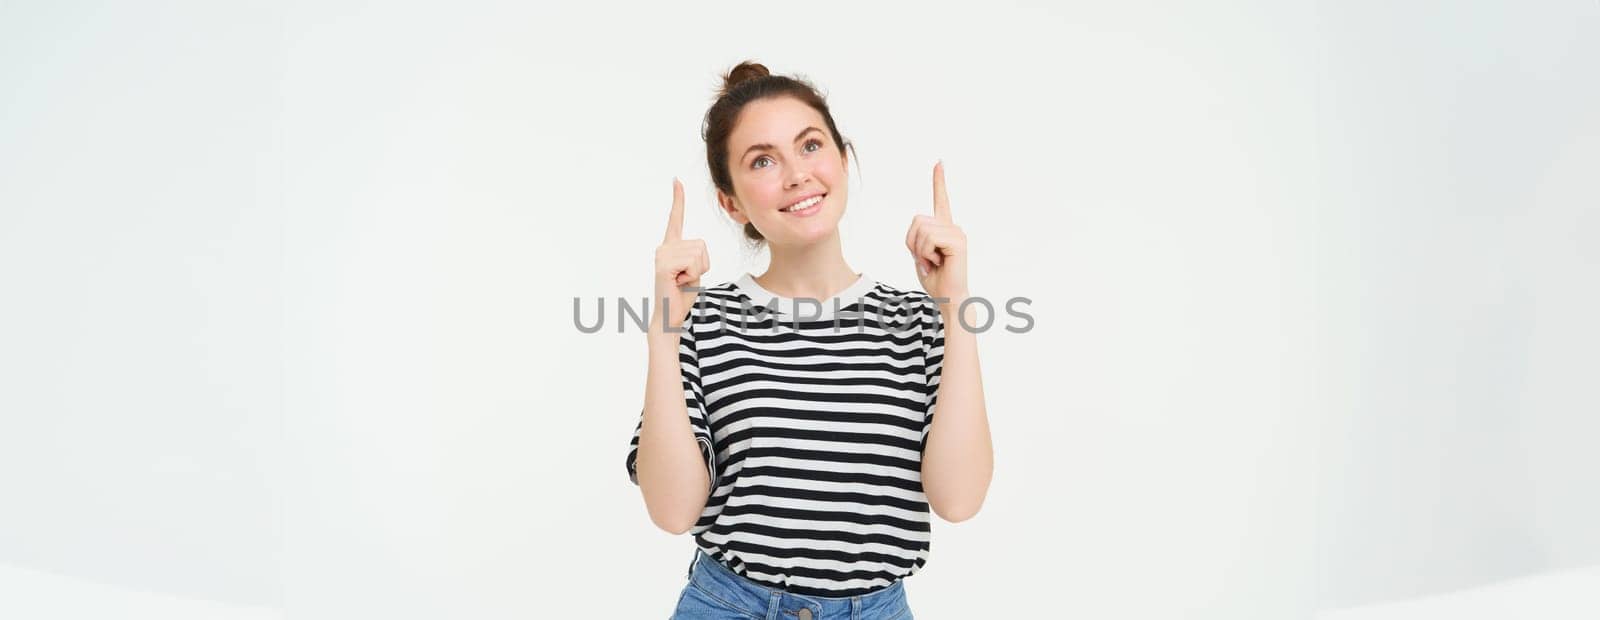 Advertising and lifestyle concept. Smiling cute woman pointing fingers up, showing advertisement, banner on top, standing over white background.